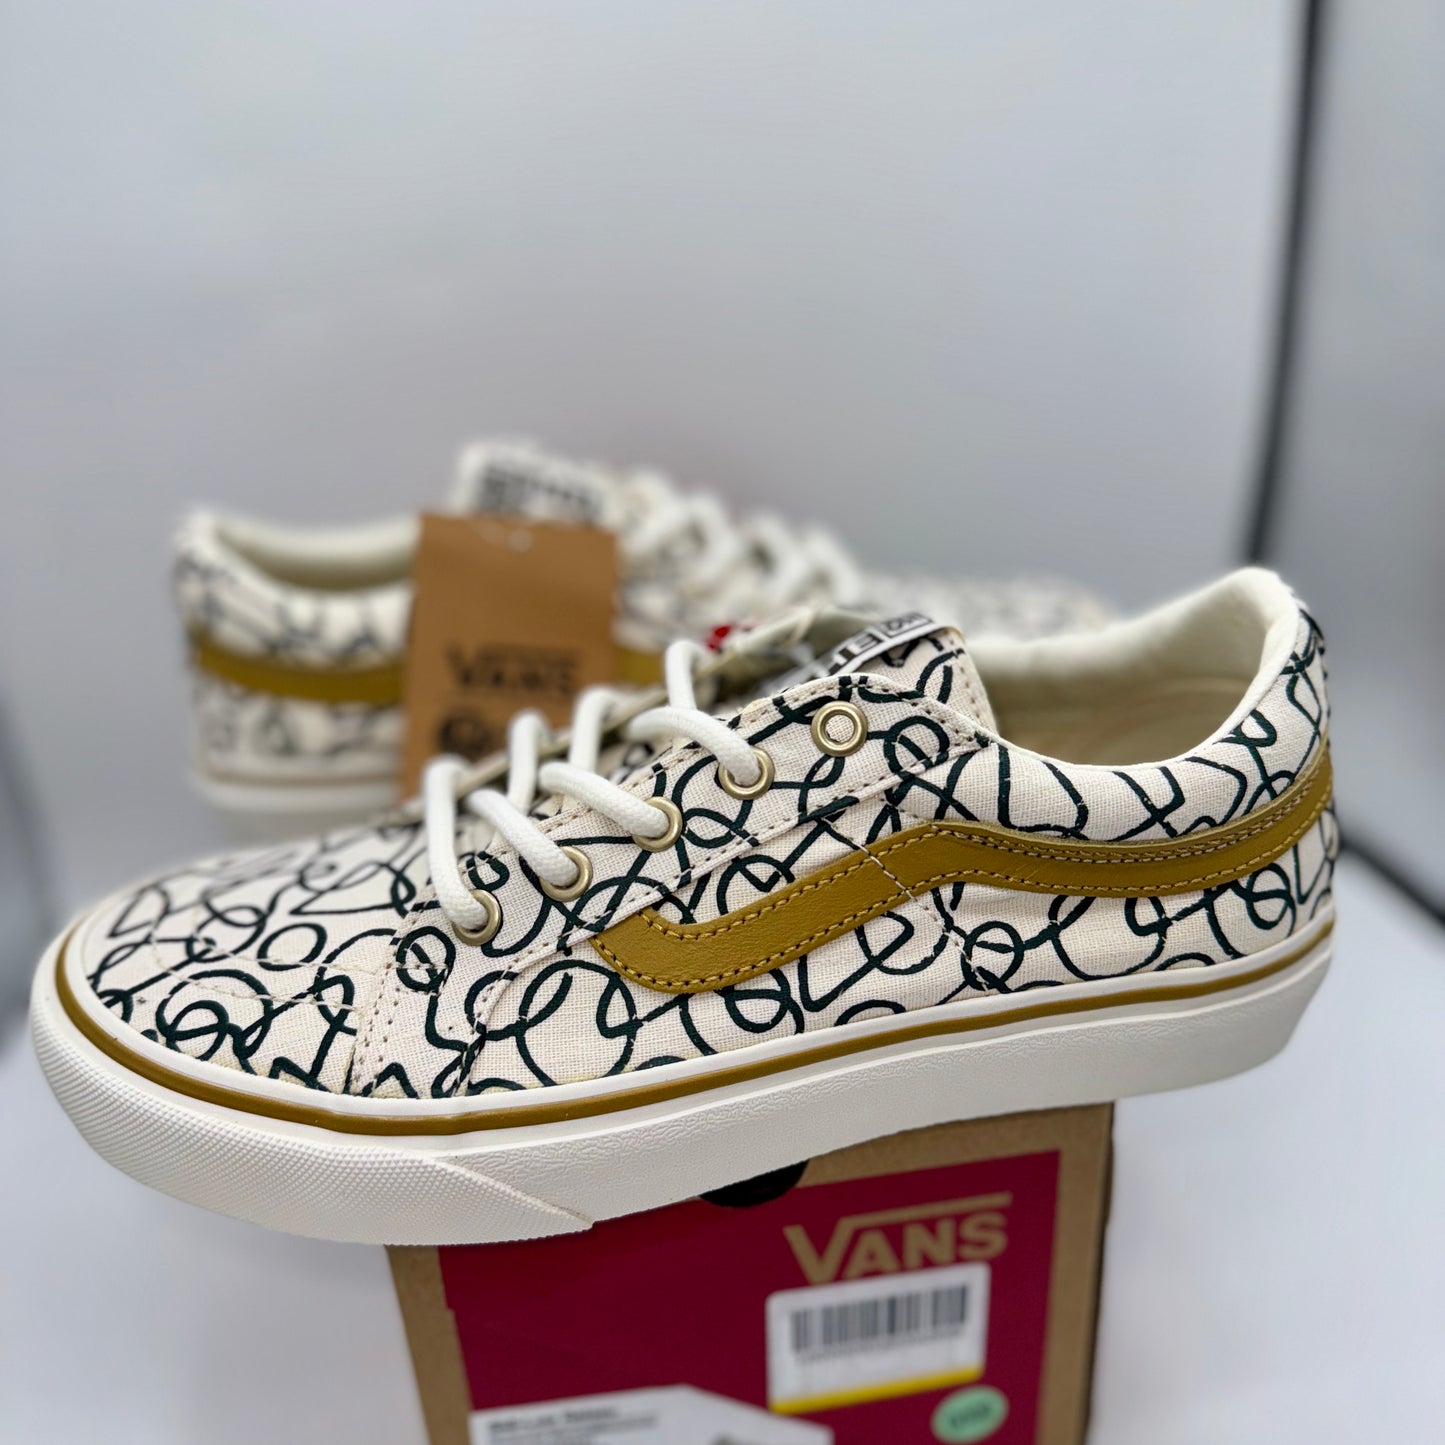 Vans Sk8 Low Reissue Sneakers Textured Waves / Marshmallow Shoes Skate